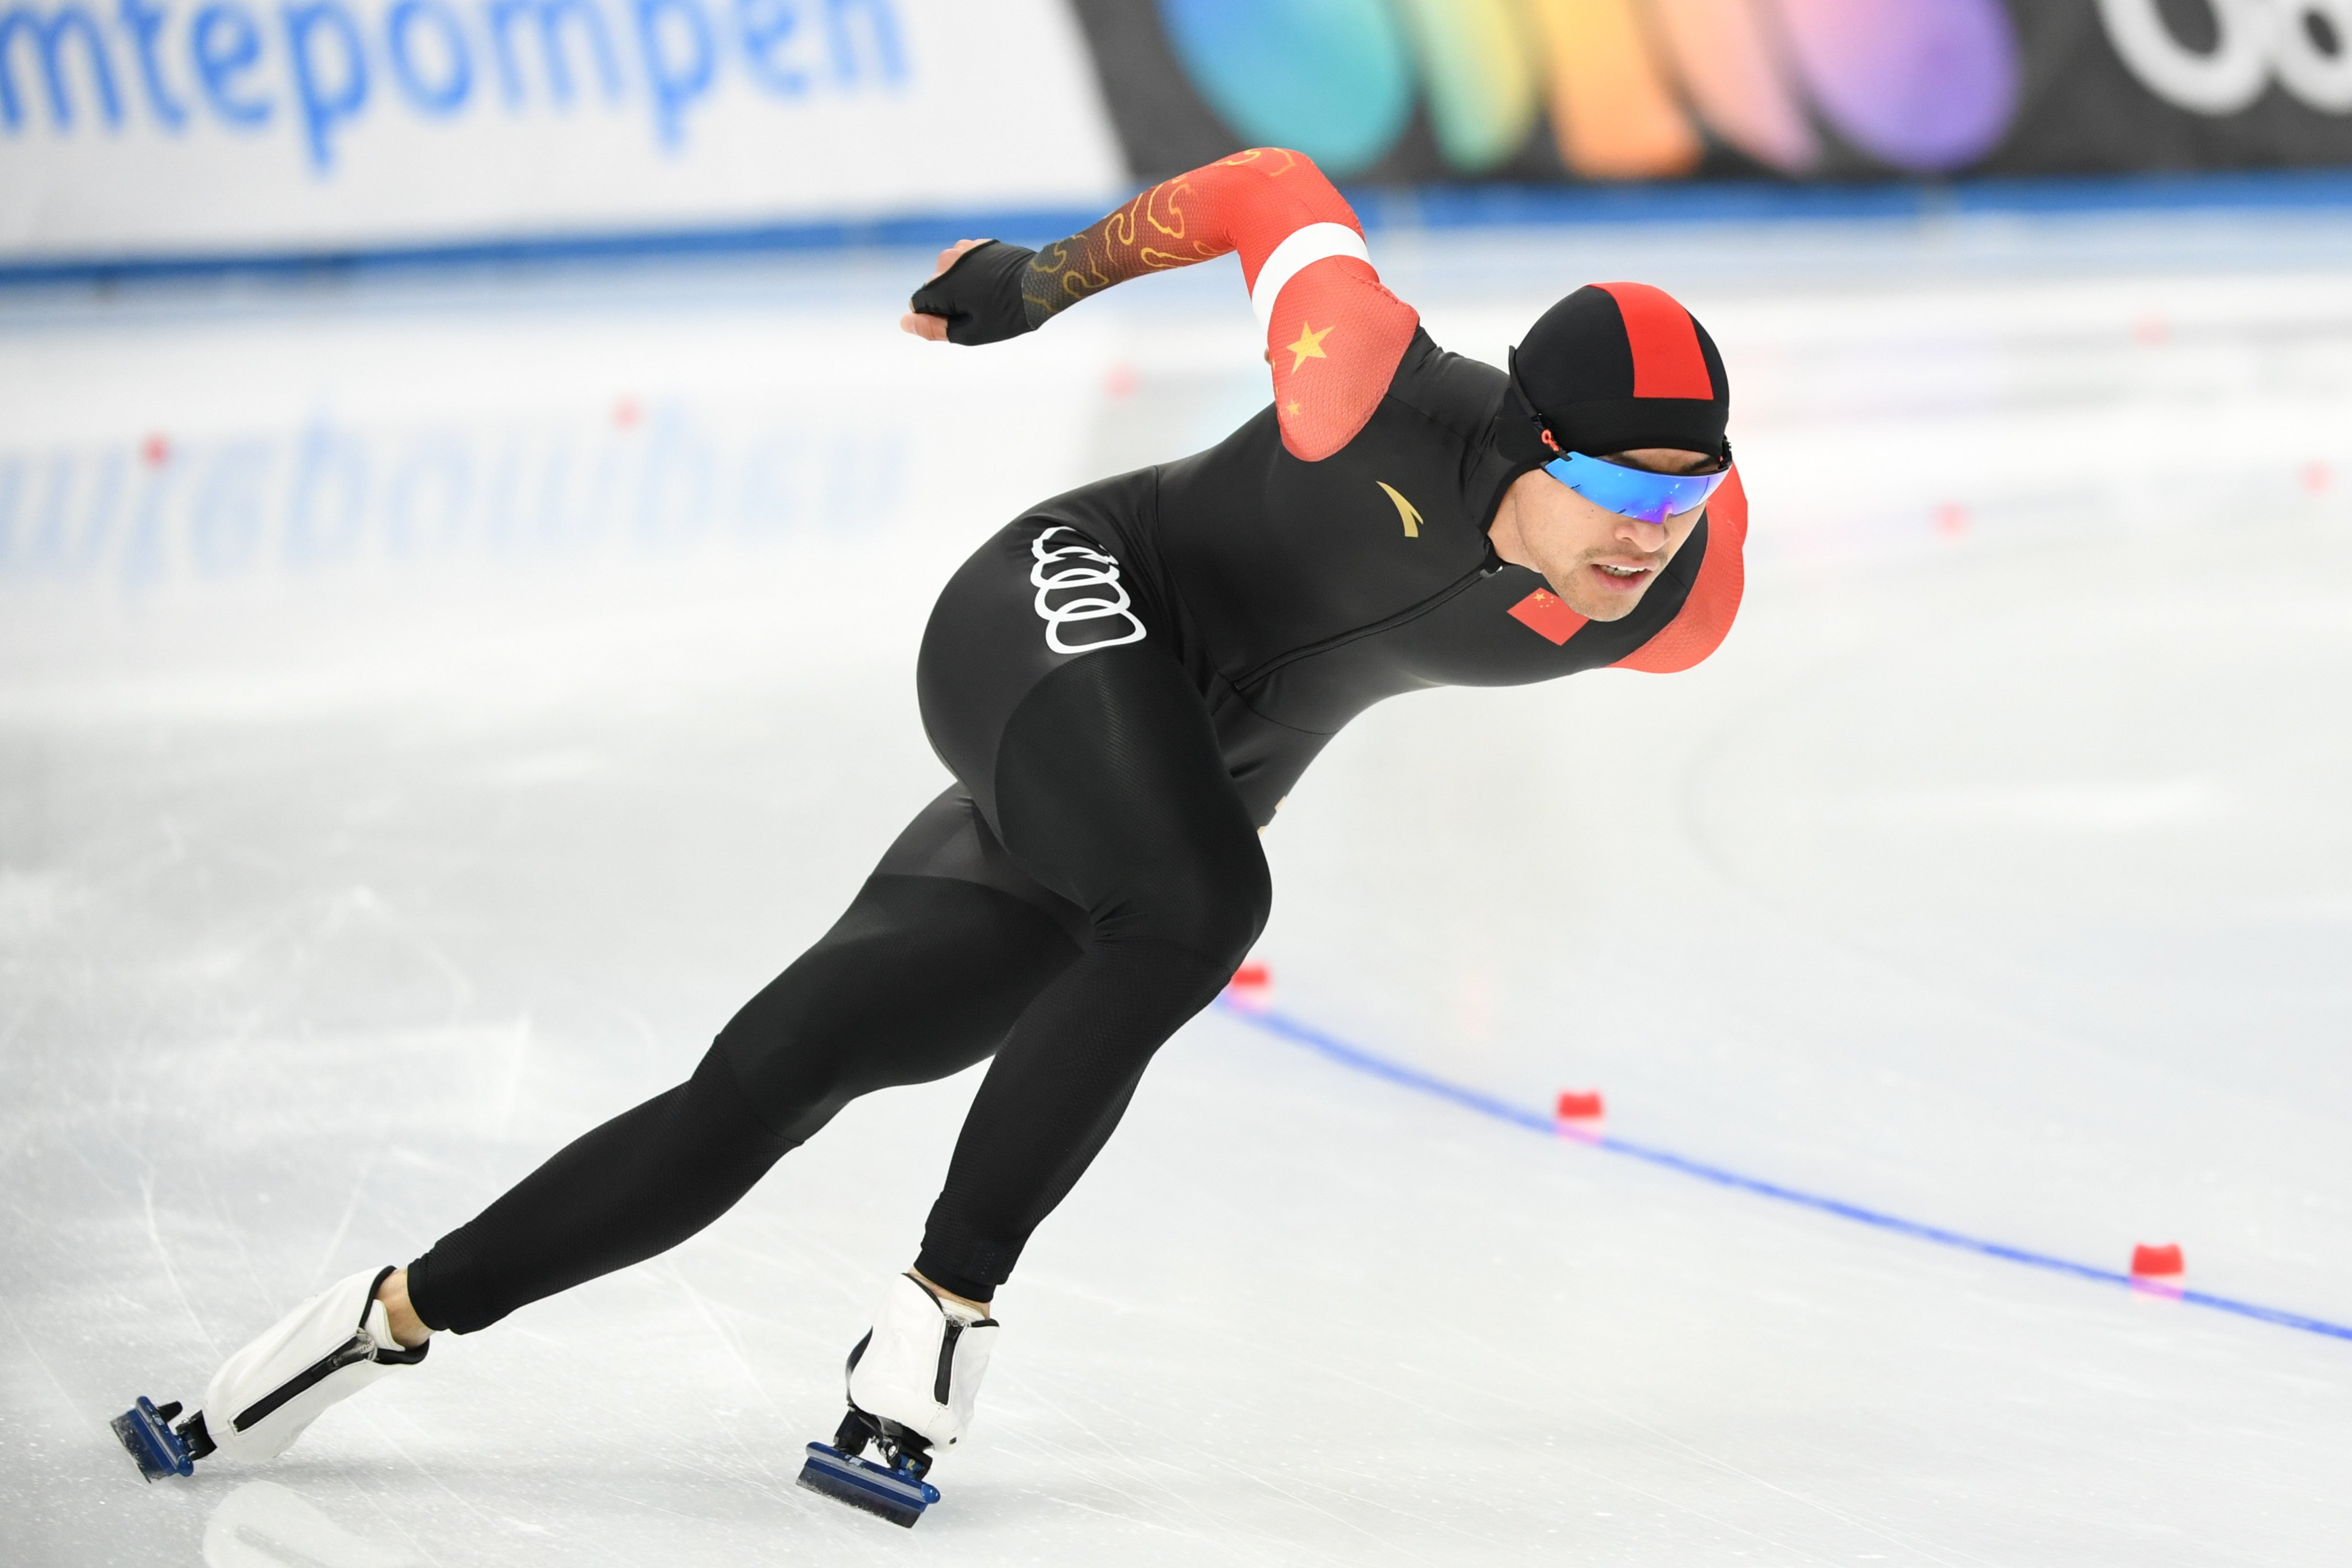 Ning Zhongyan of China won his third medal in the Beijing session of the Speed Skating World Cup. Photo: Xinhua